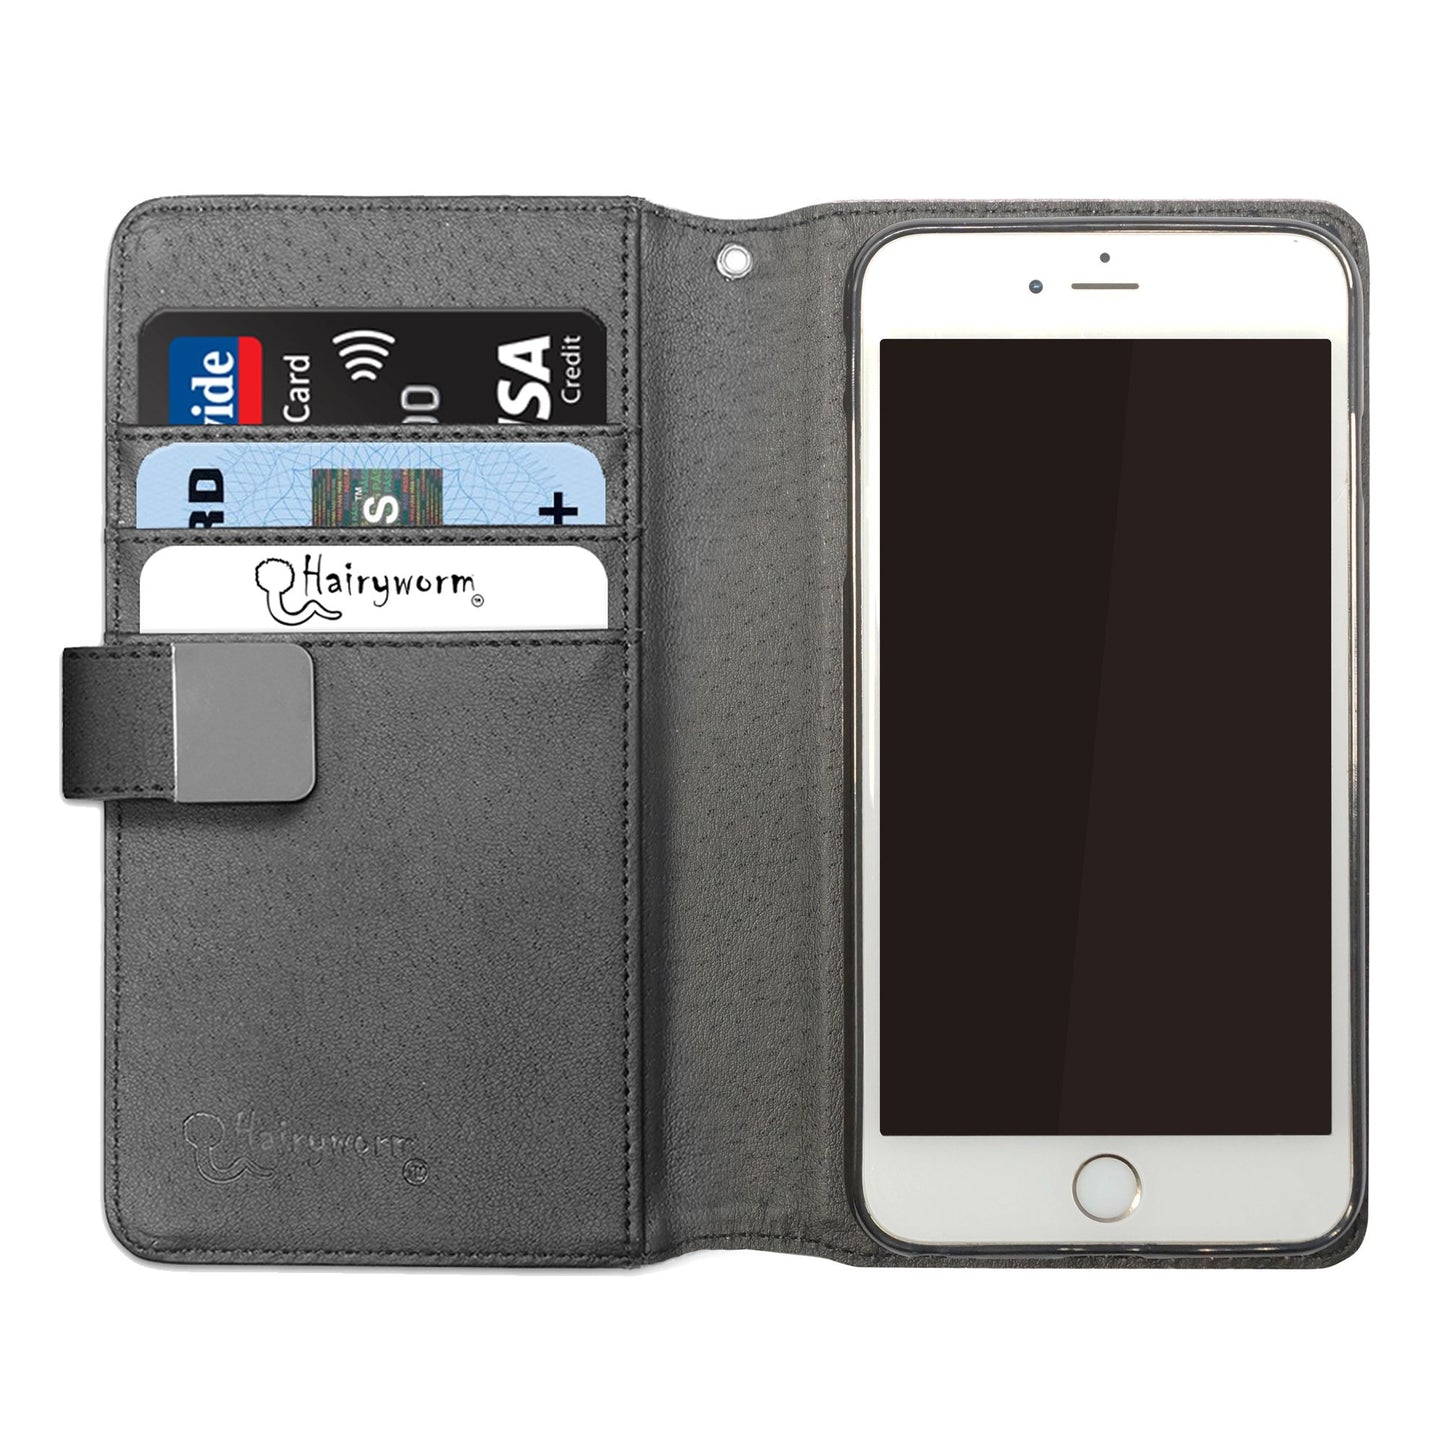 Personalised Motorola Phone Leather Wallet with Silver Floral Unicorn and Text on Dark Grey